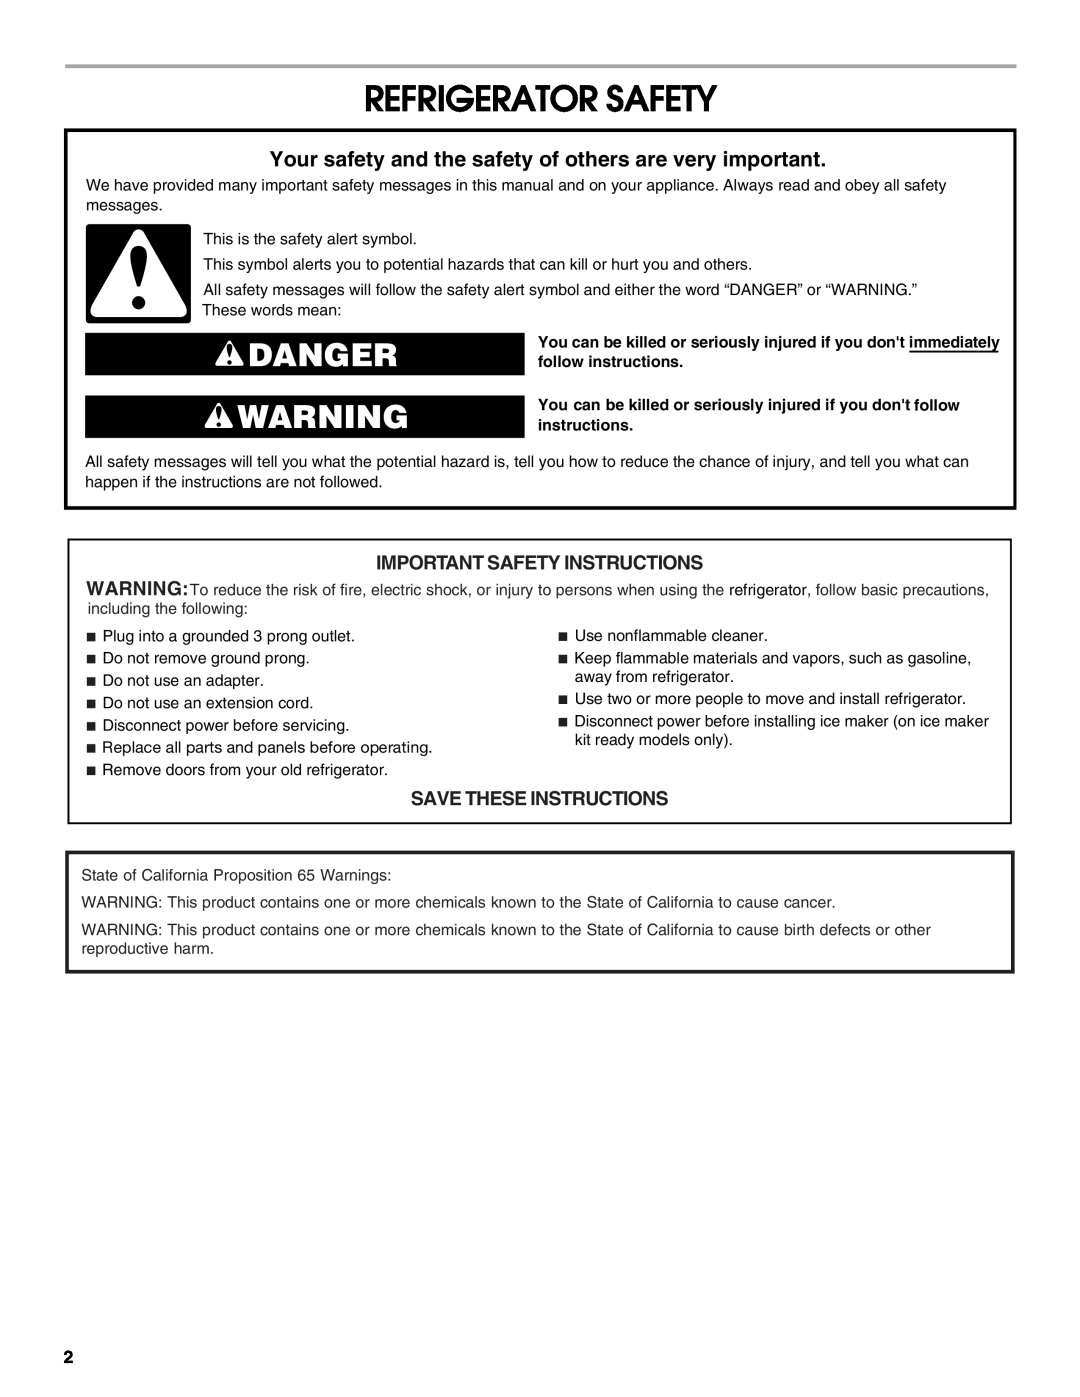 Whirlpool W10726840A Refrigerator Safety, Danger, Important Safety Instructions, Save These Instructions 